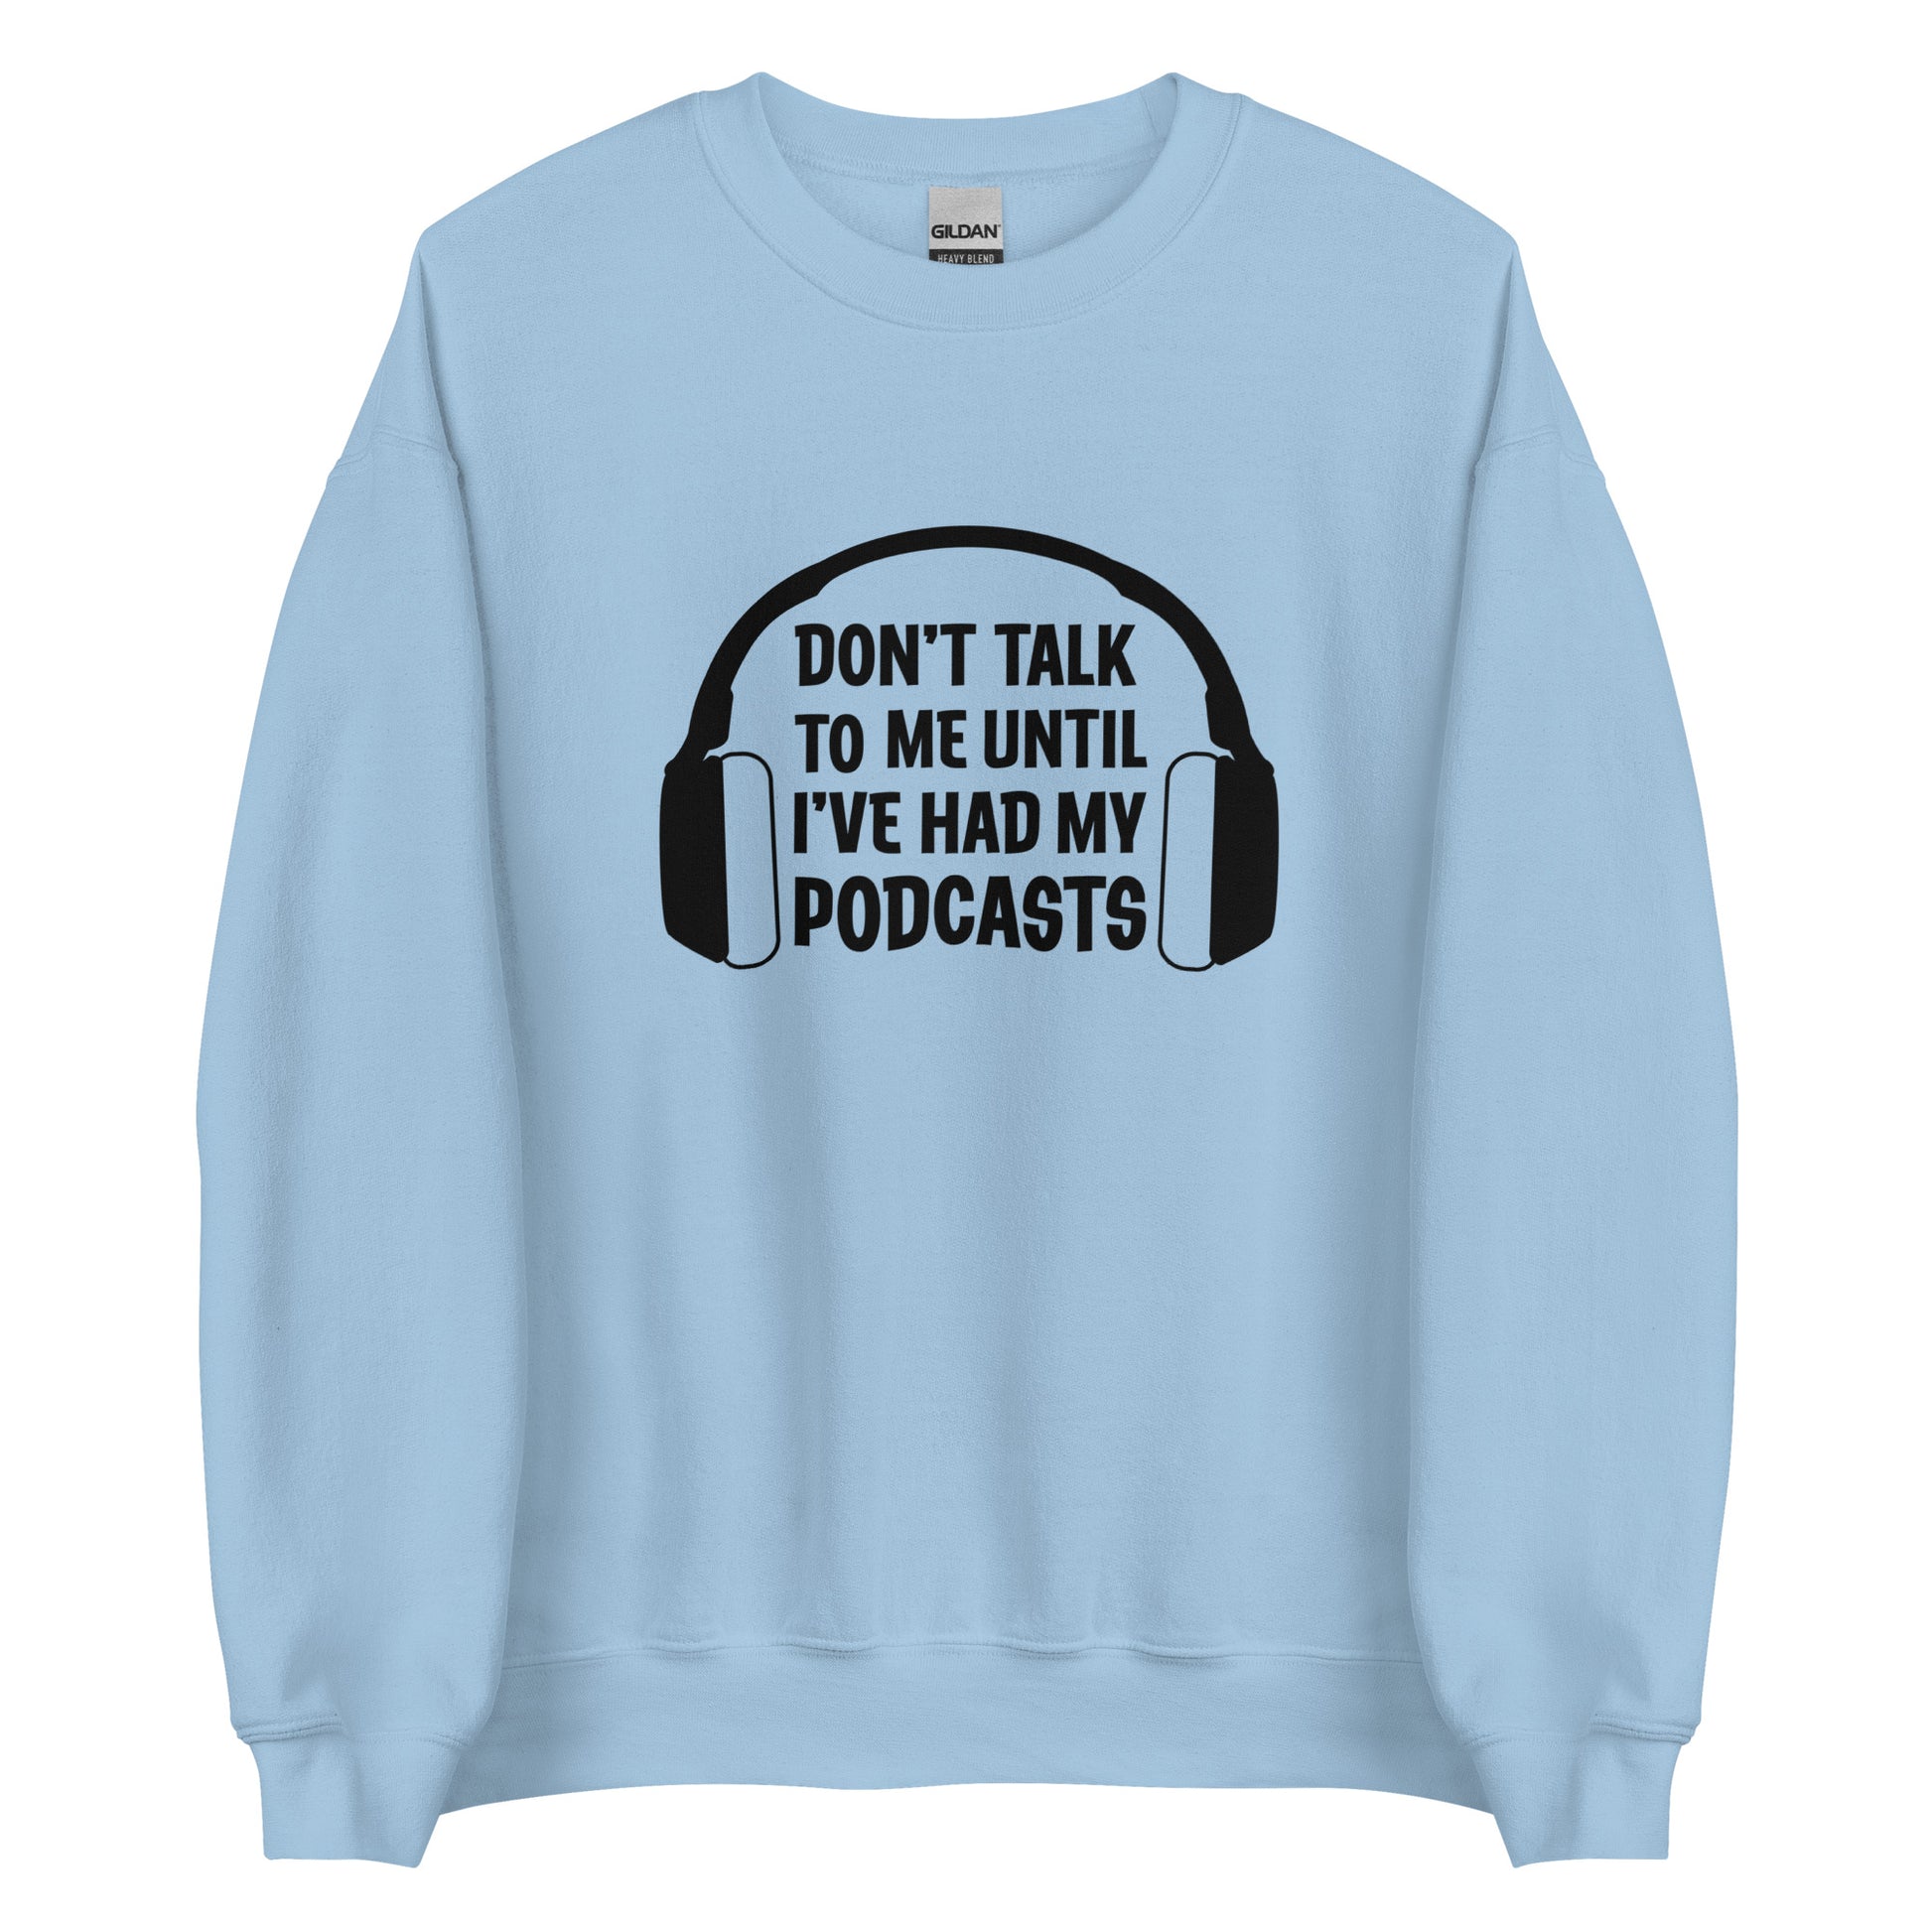 A light blue crewneck sweatshirt with an image of headphones and text reading "Don't talk to me until I've had my podcasts"